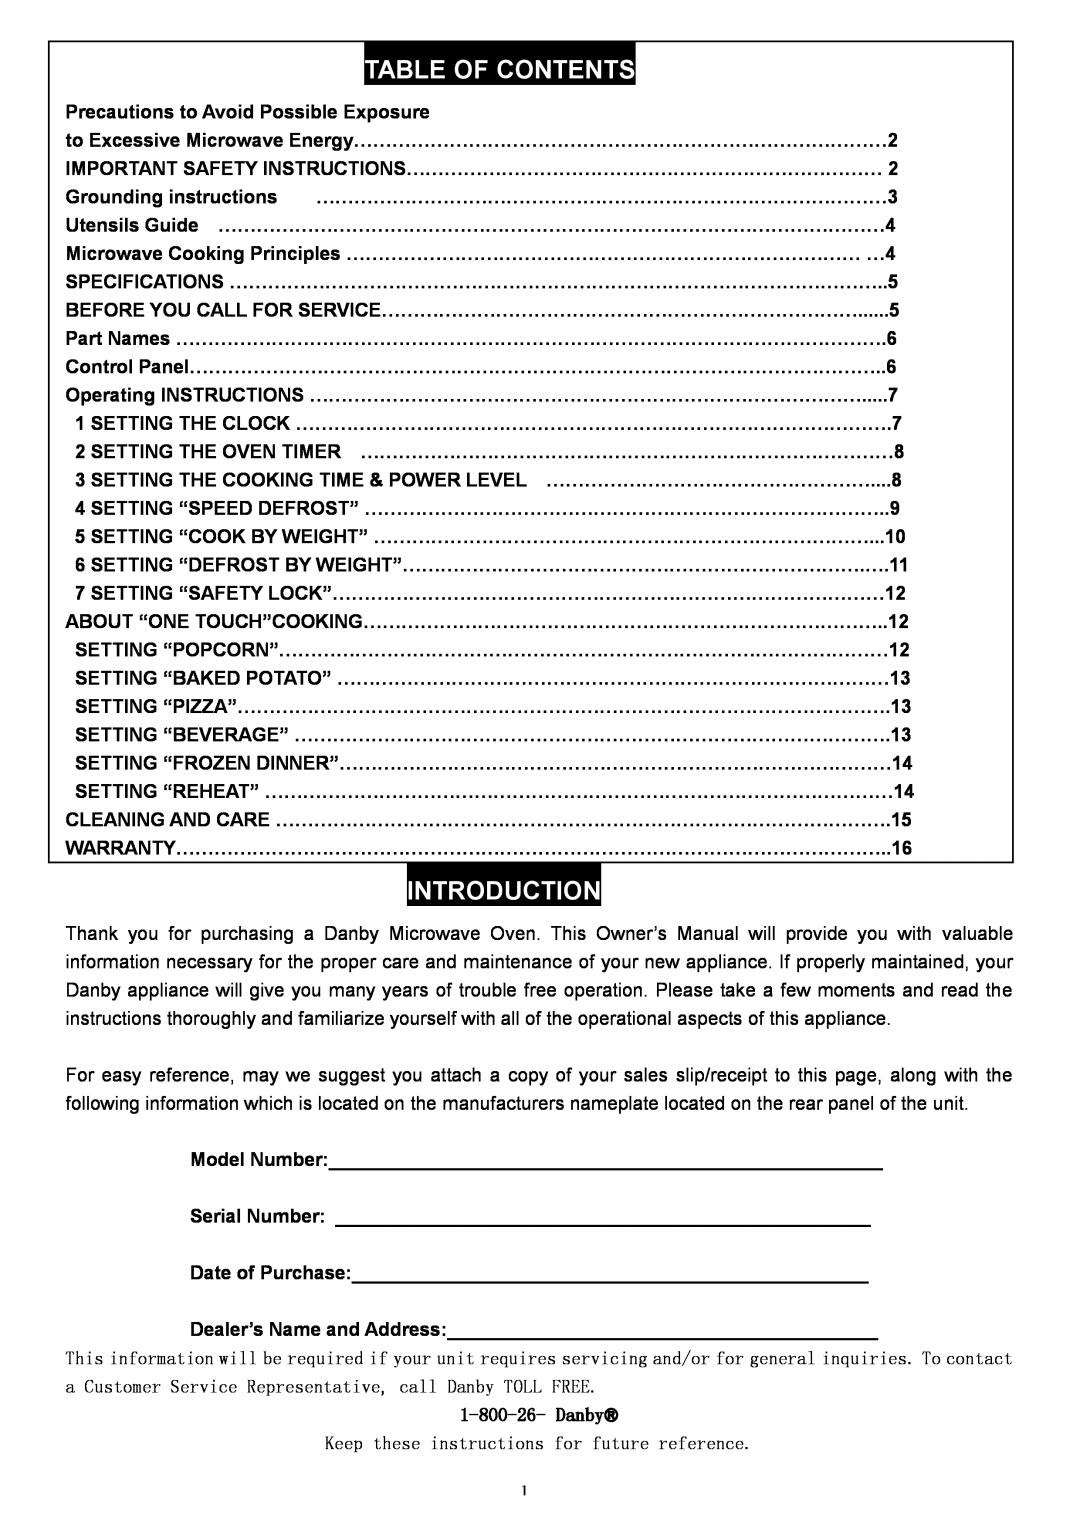 Danby DMW945SS owner manual Table Of Contents, Introduction, Danby Keep these instructions for future reference 